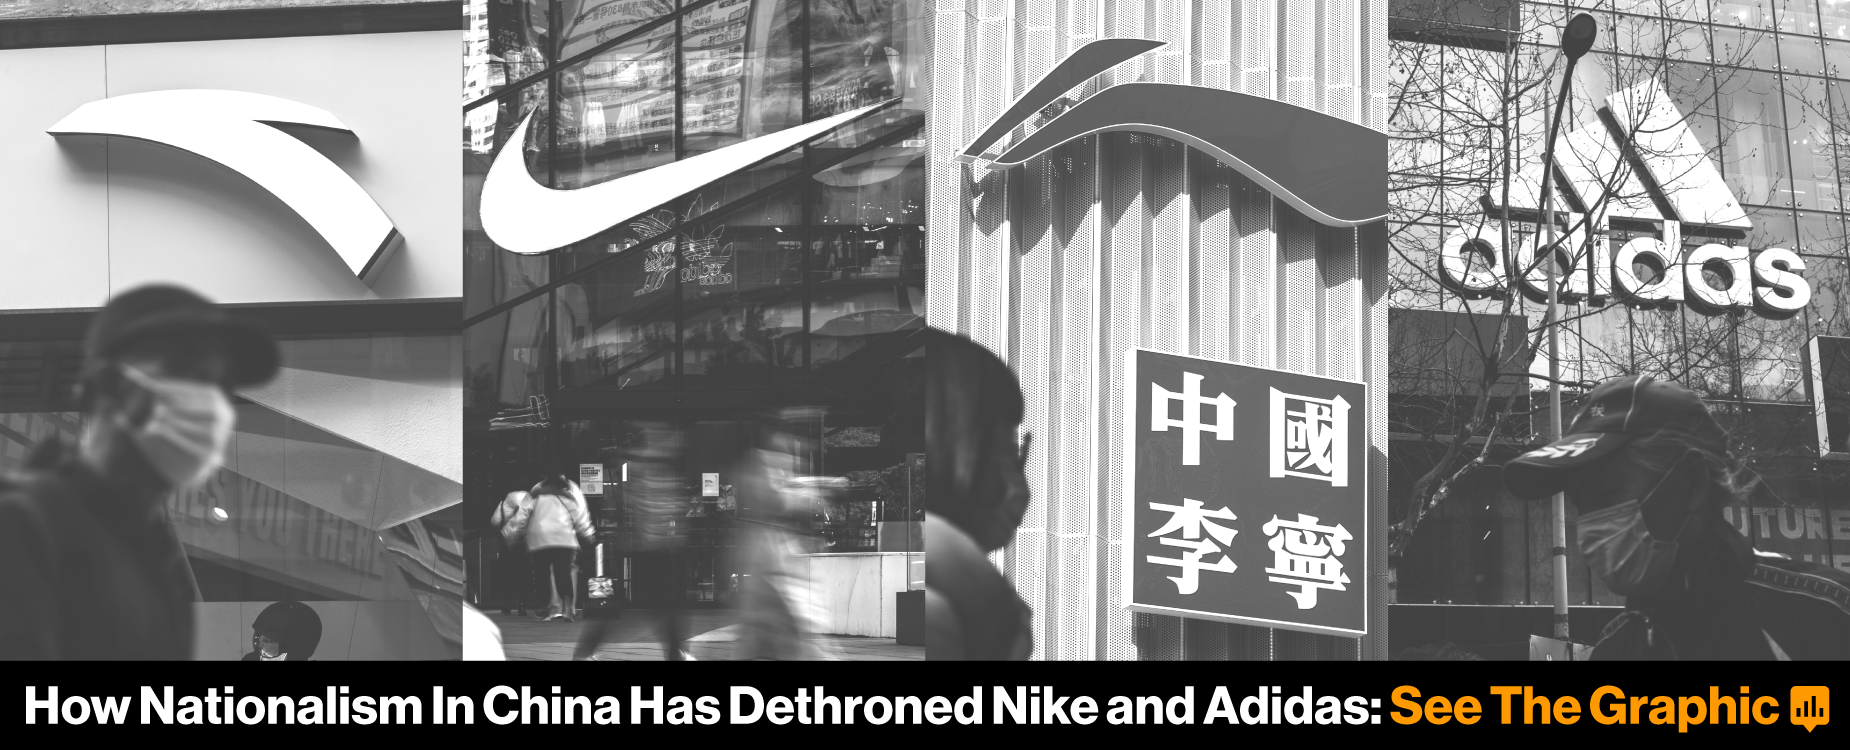 How Nationalism in China Has Dethroned Nike and Adidas: See the Graphic